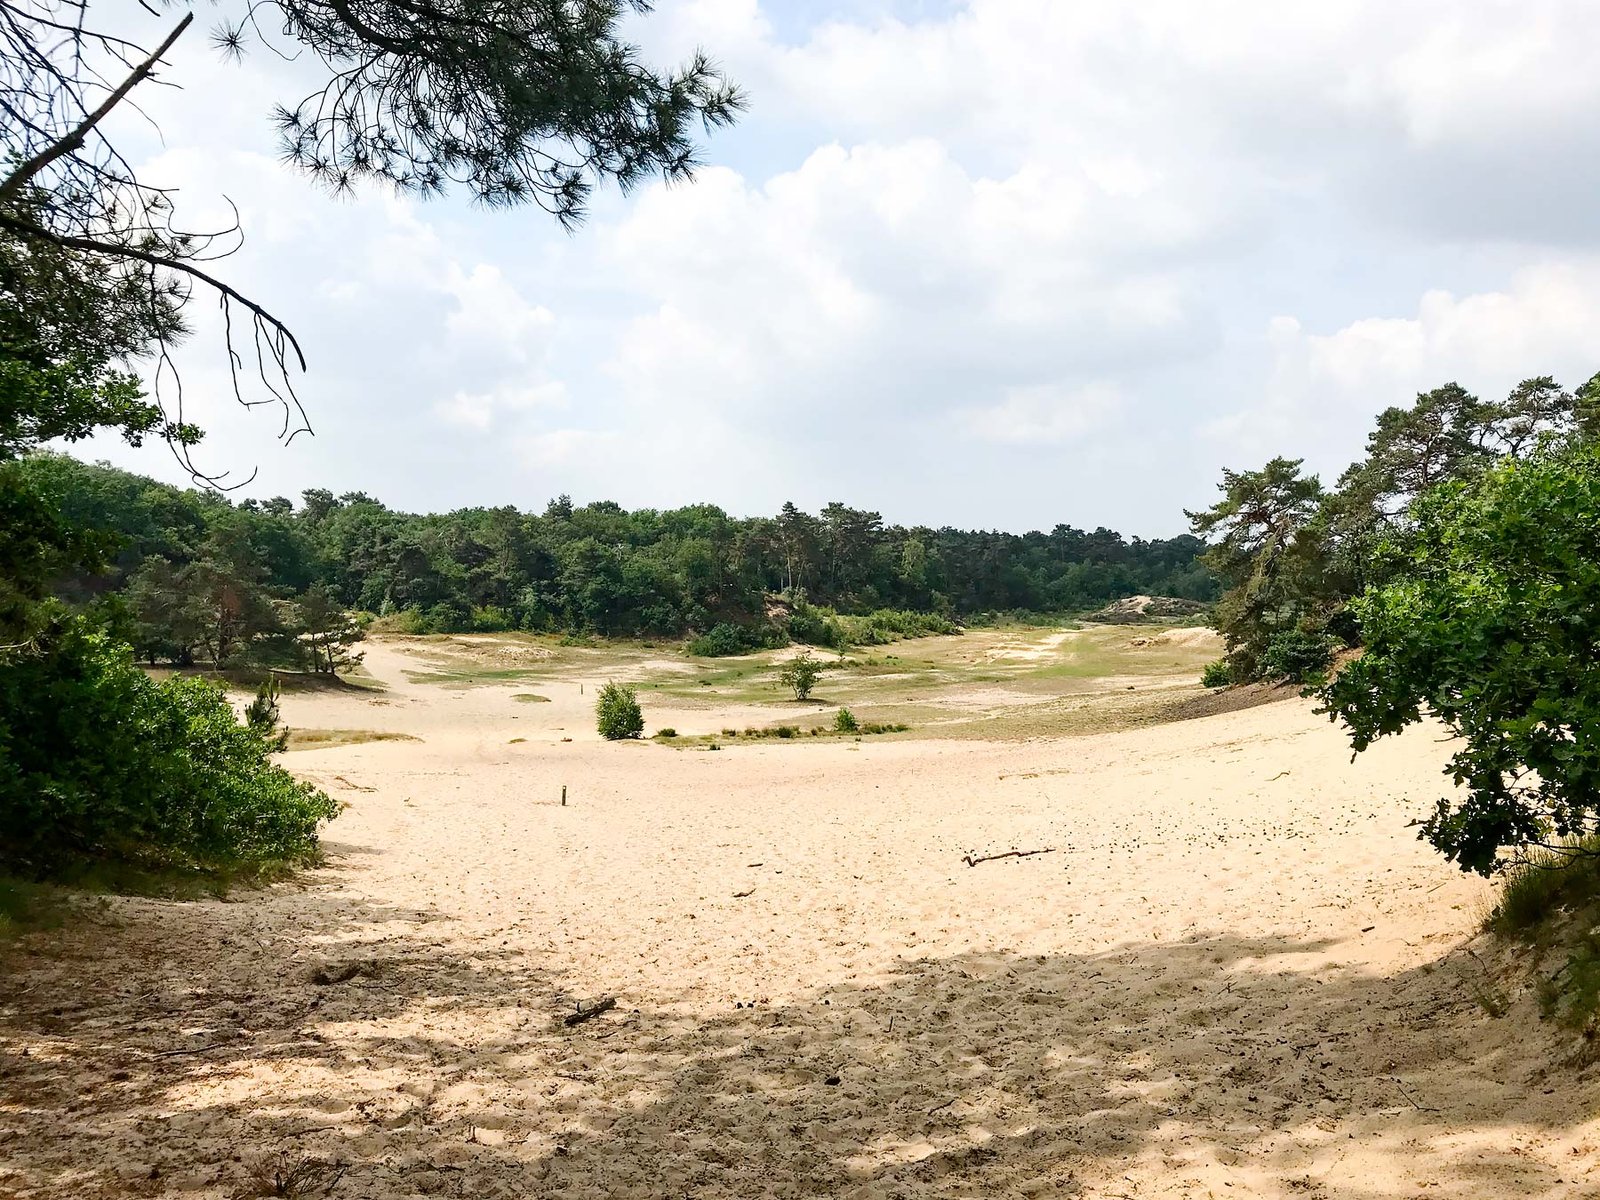 10 Things You Don’t Want to Miss When You Visit Brabant in The Netherlands | National Park 'De Loonse en Drunense Duinen'